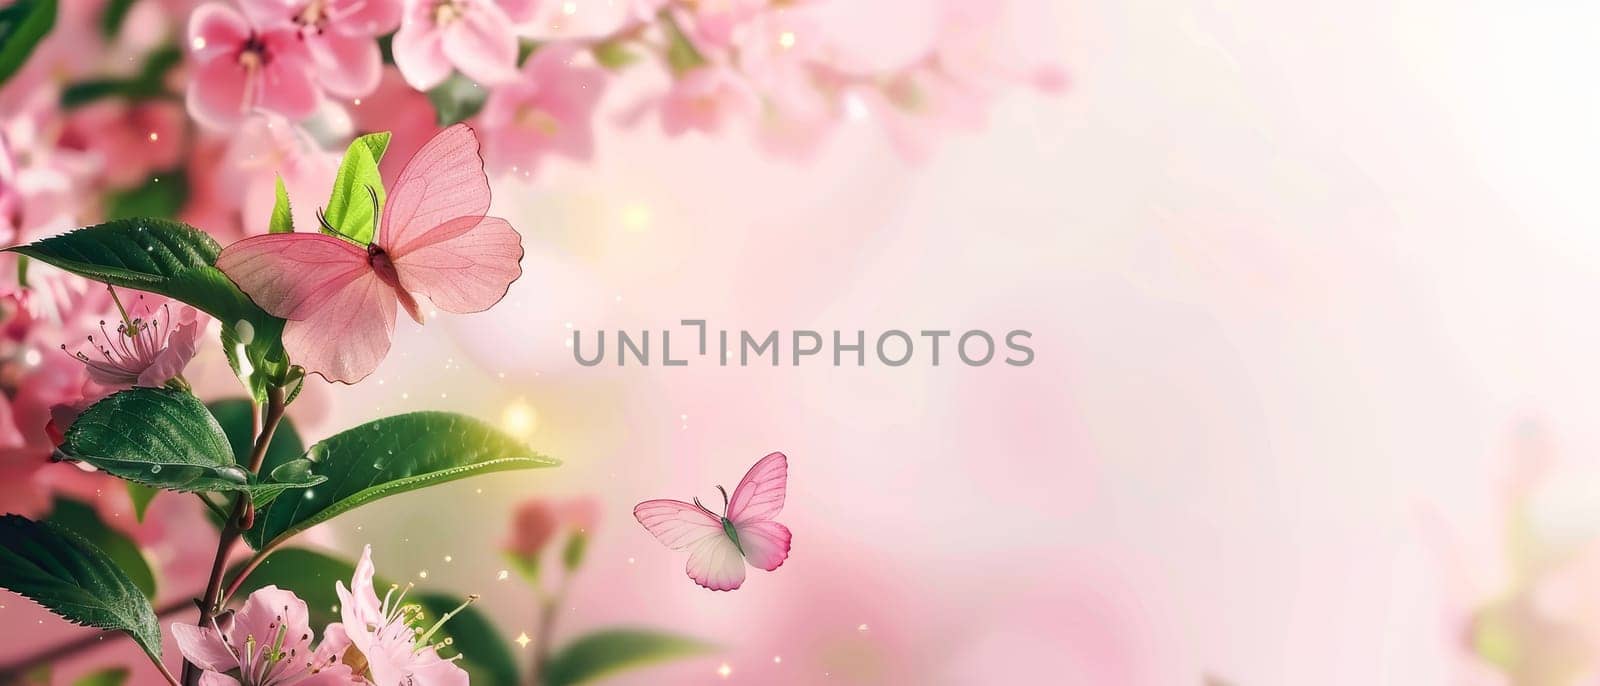 Delicate pink blossoms and fluttering butterflies welcome the whispers of spring on a backdrop of soft hues.